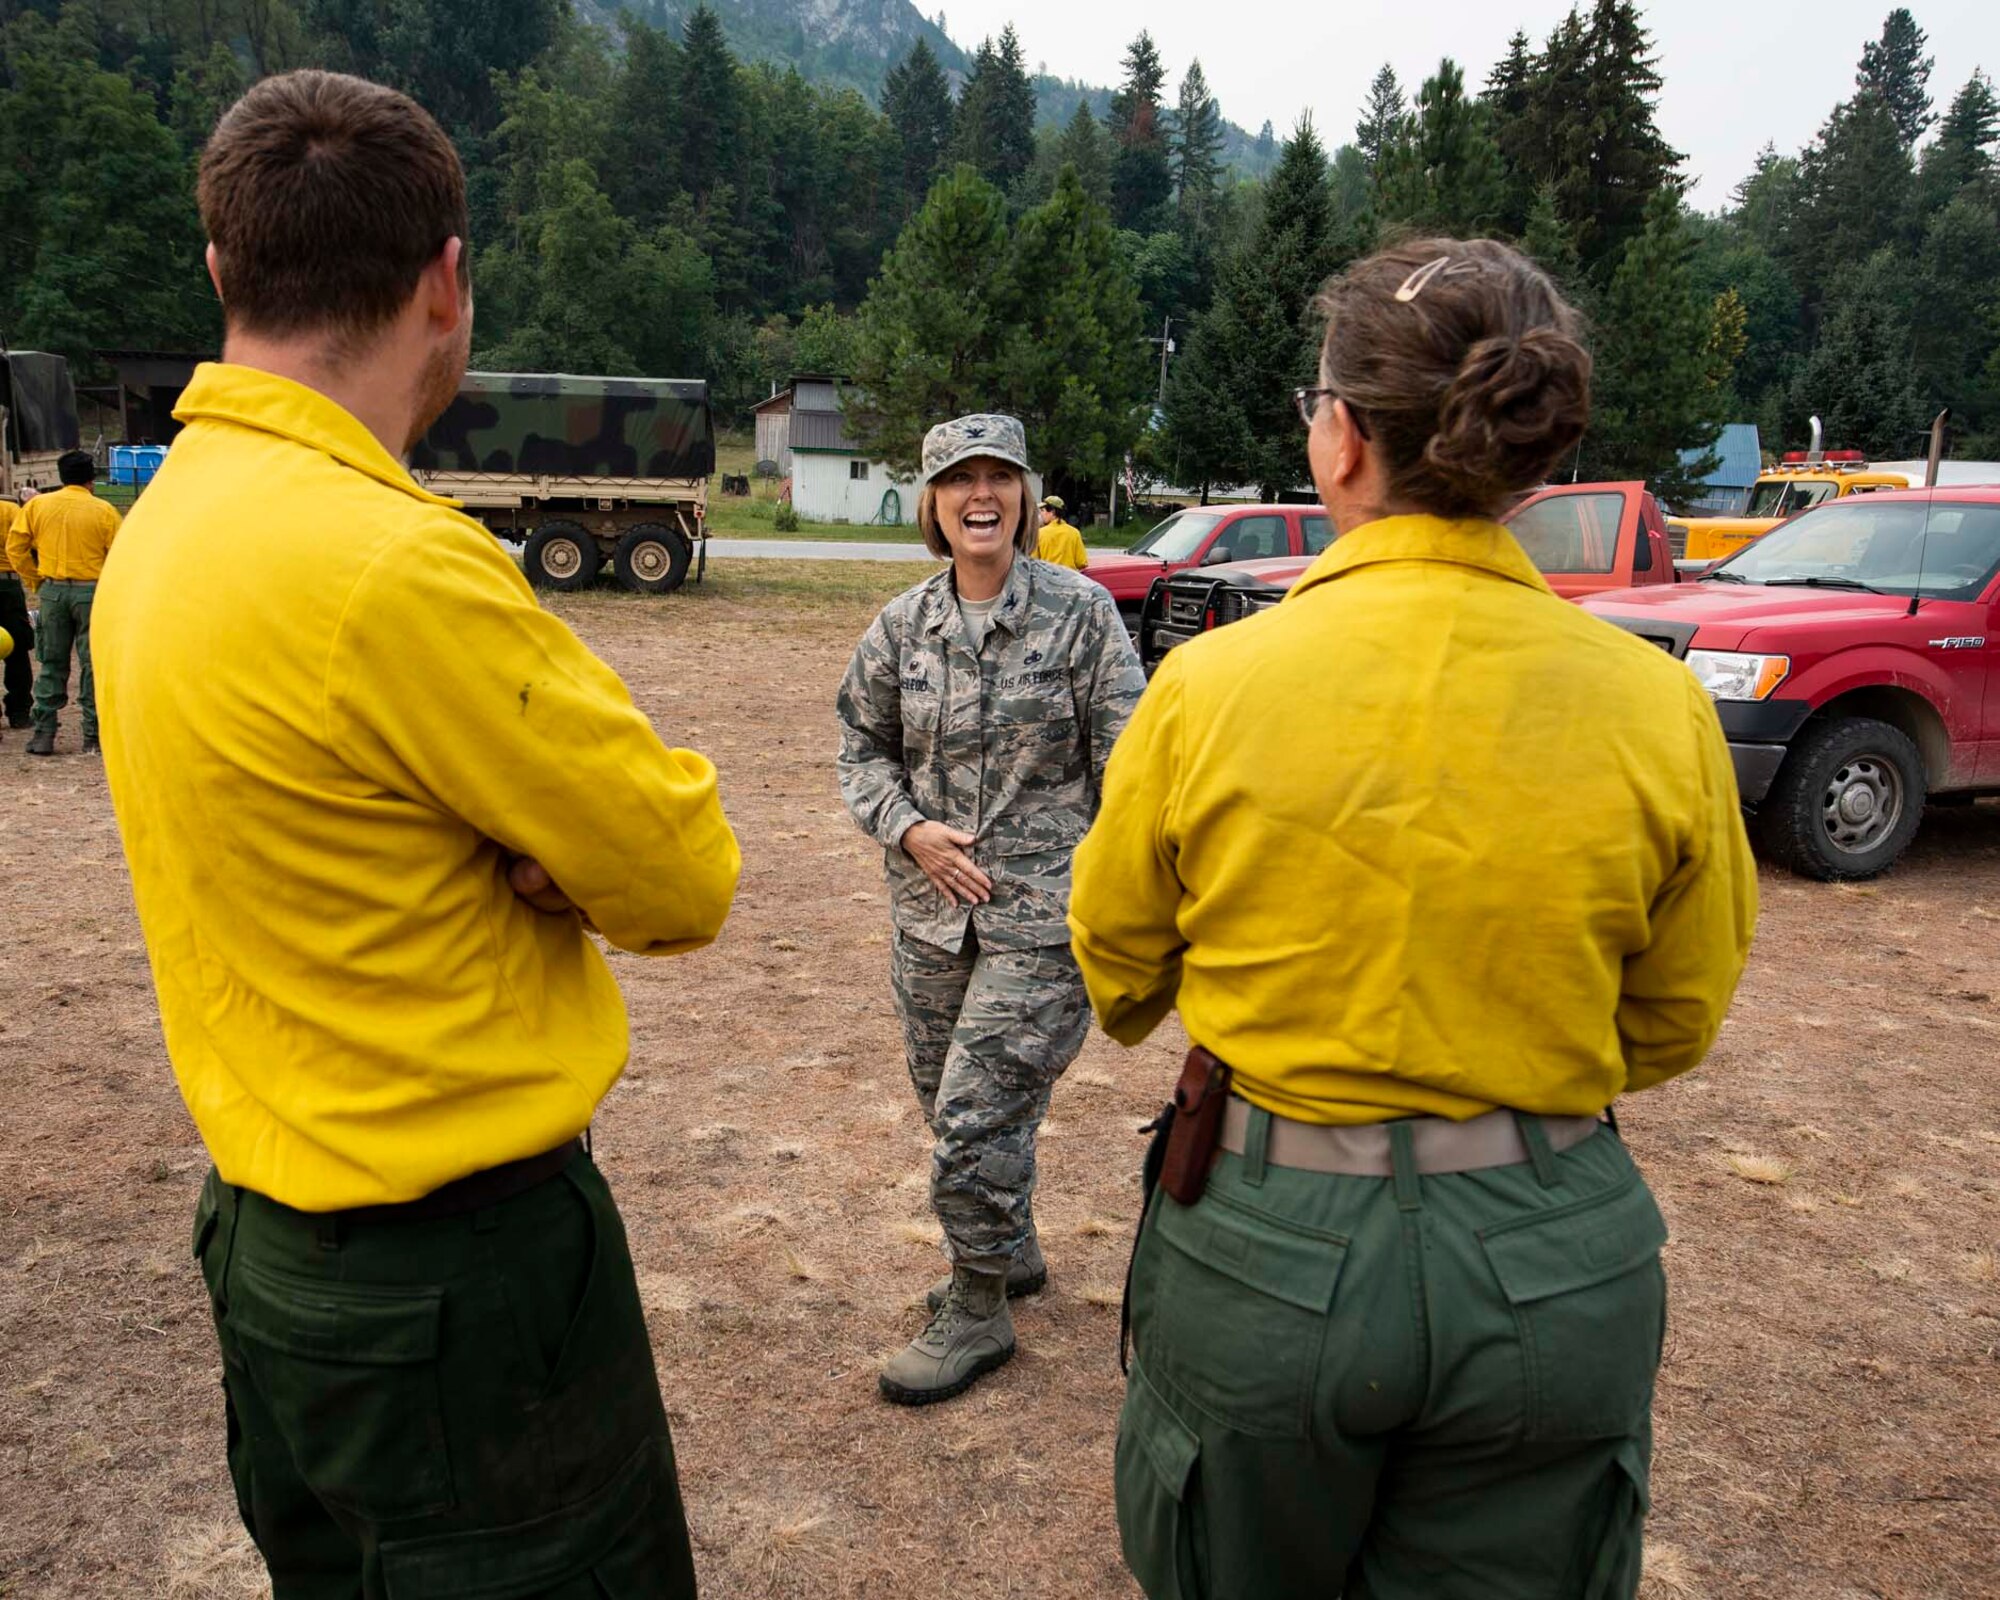 Col. Lisa McLeod, commander of the 141st Maintenance Group, laughs with Guardsmen from the 141st Air Refueling Wing while visiting the Sheep Creek fire camp in Northport, Wash. August 8, 2018. Nearly 200 Air and Army National Guardsmen were mobilized to help aid in firefighting efforts throughout Washington State. (U.S. Air National Guard photo by Staff Sgt. Rose M. Lust)